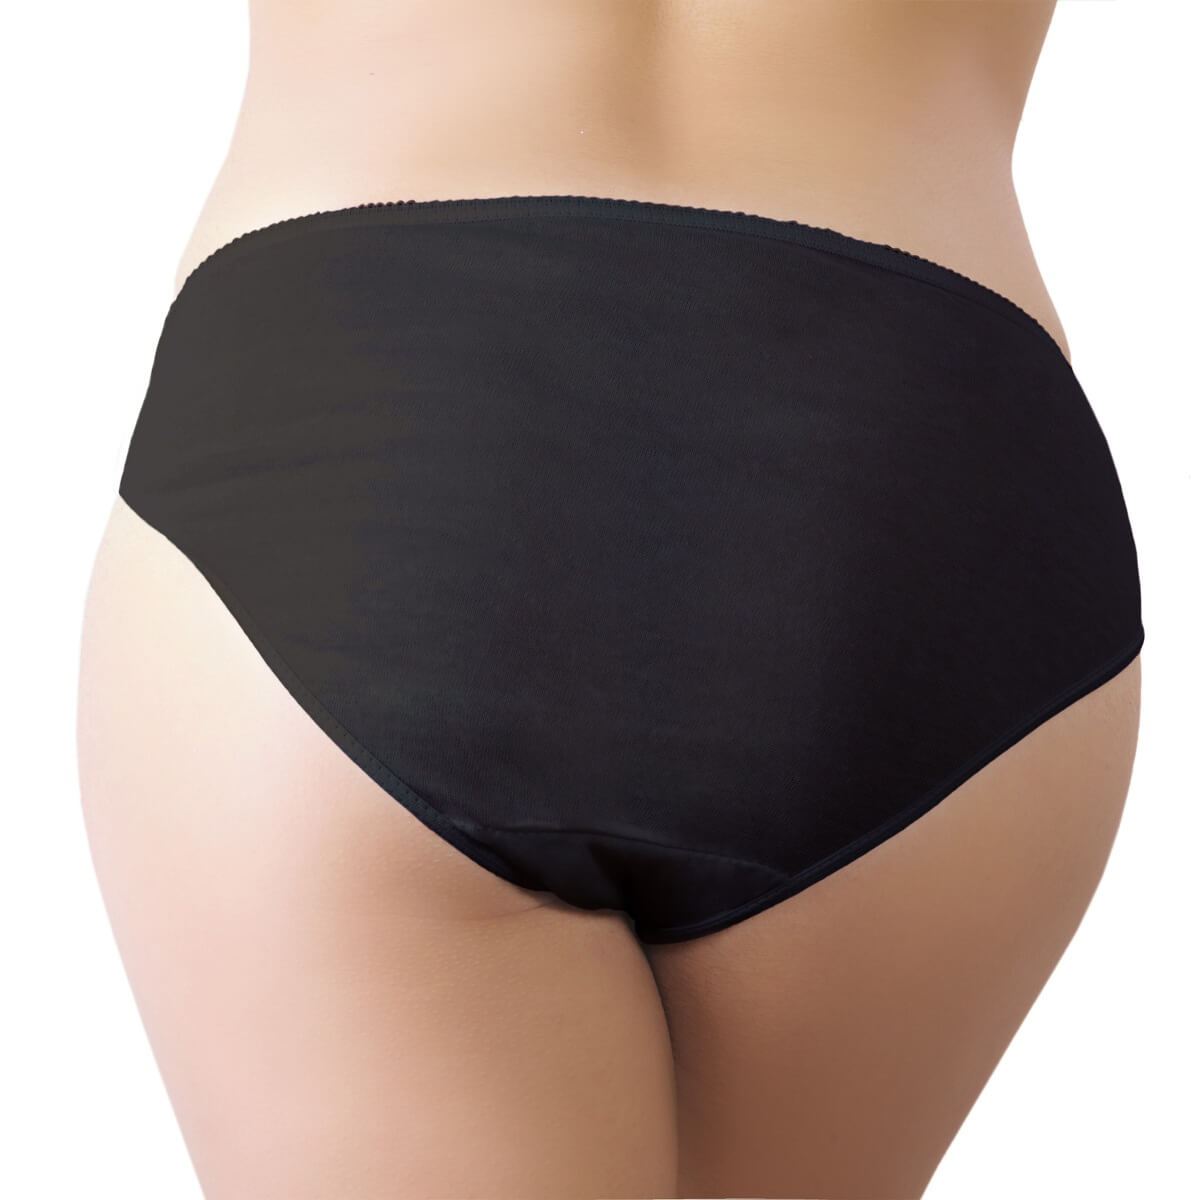 Disposable black cotton knickers pants briefs for hospital maternity